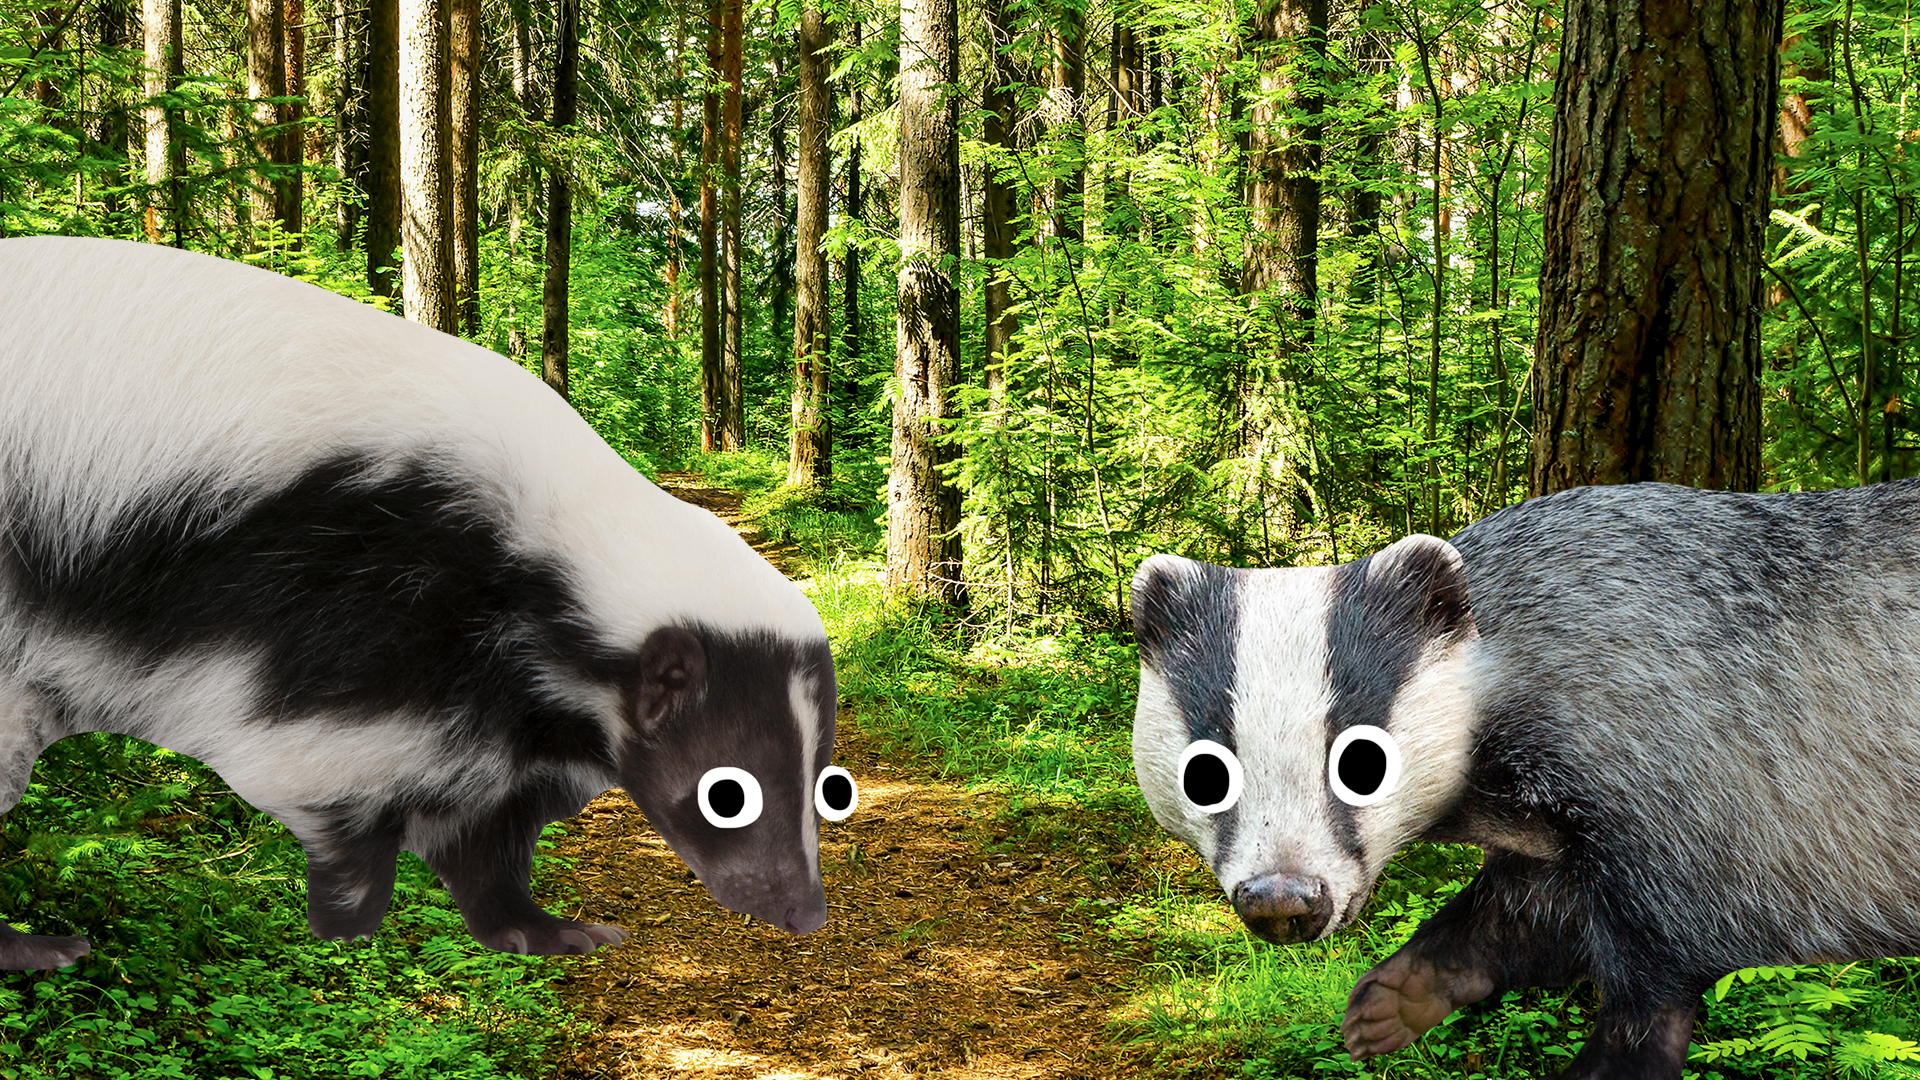 A skunk and a badger in the woods